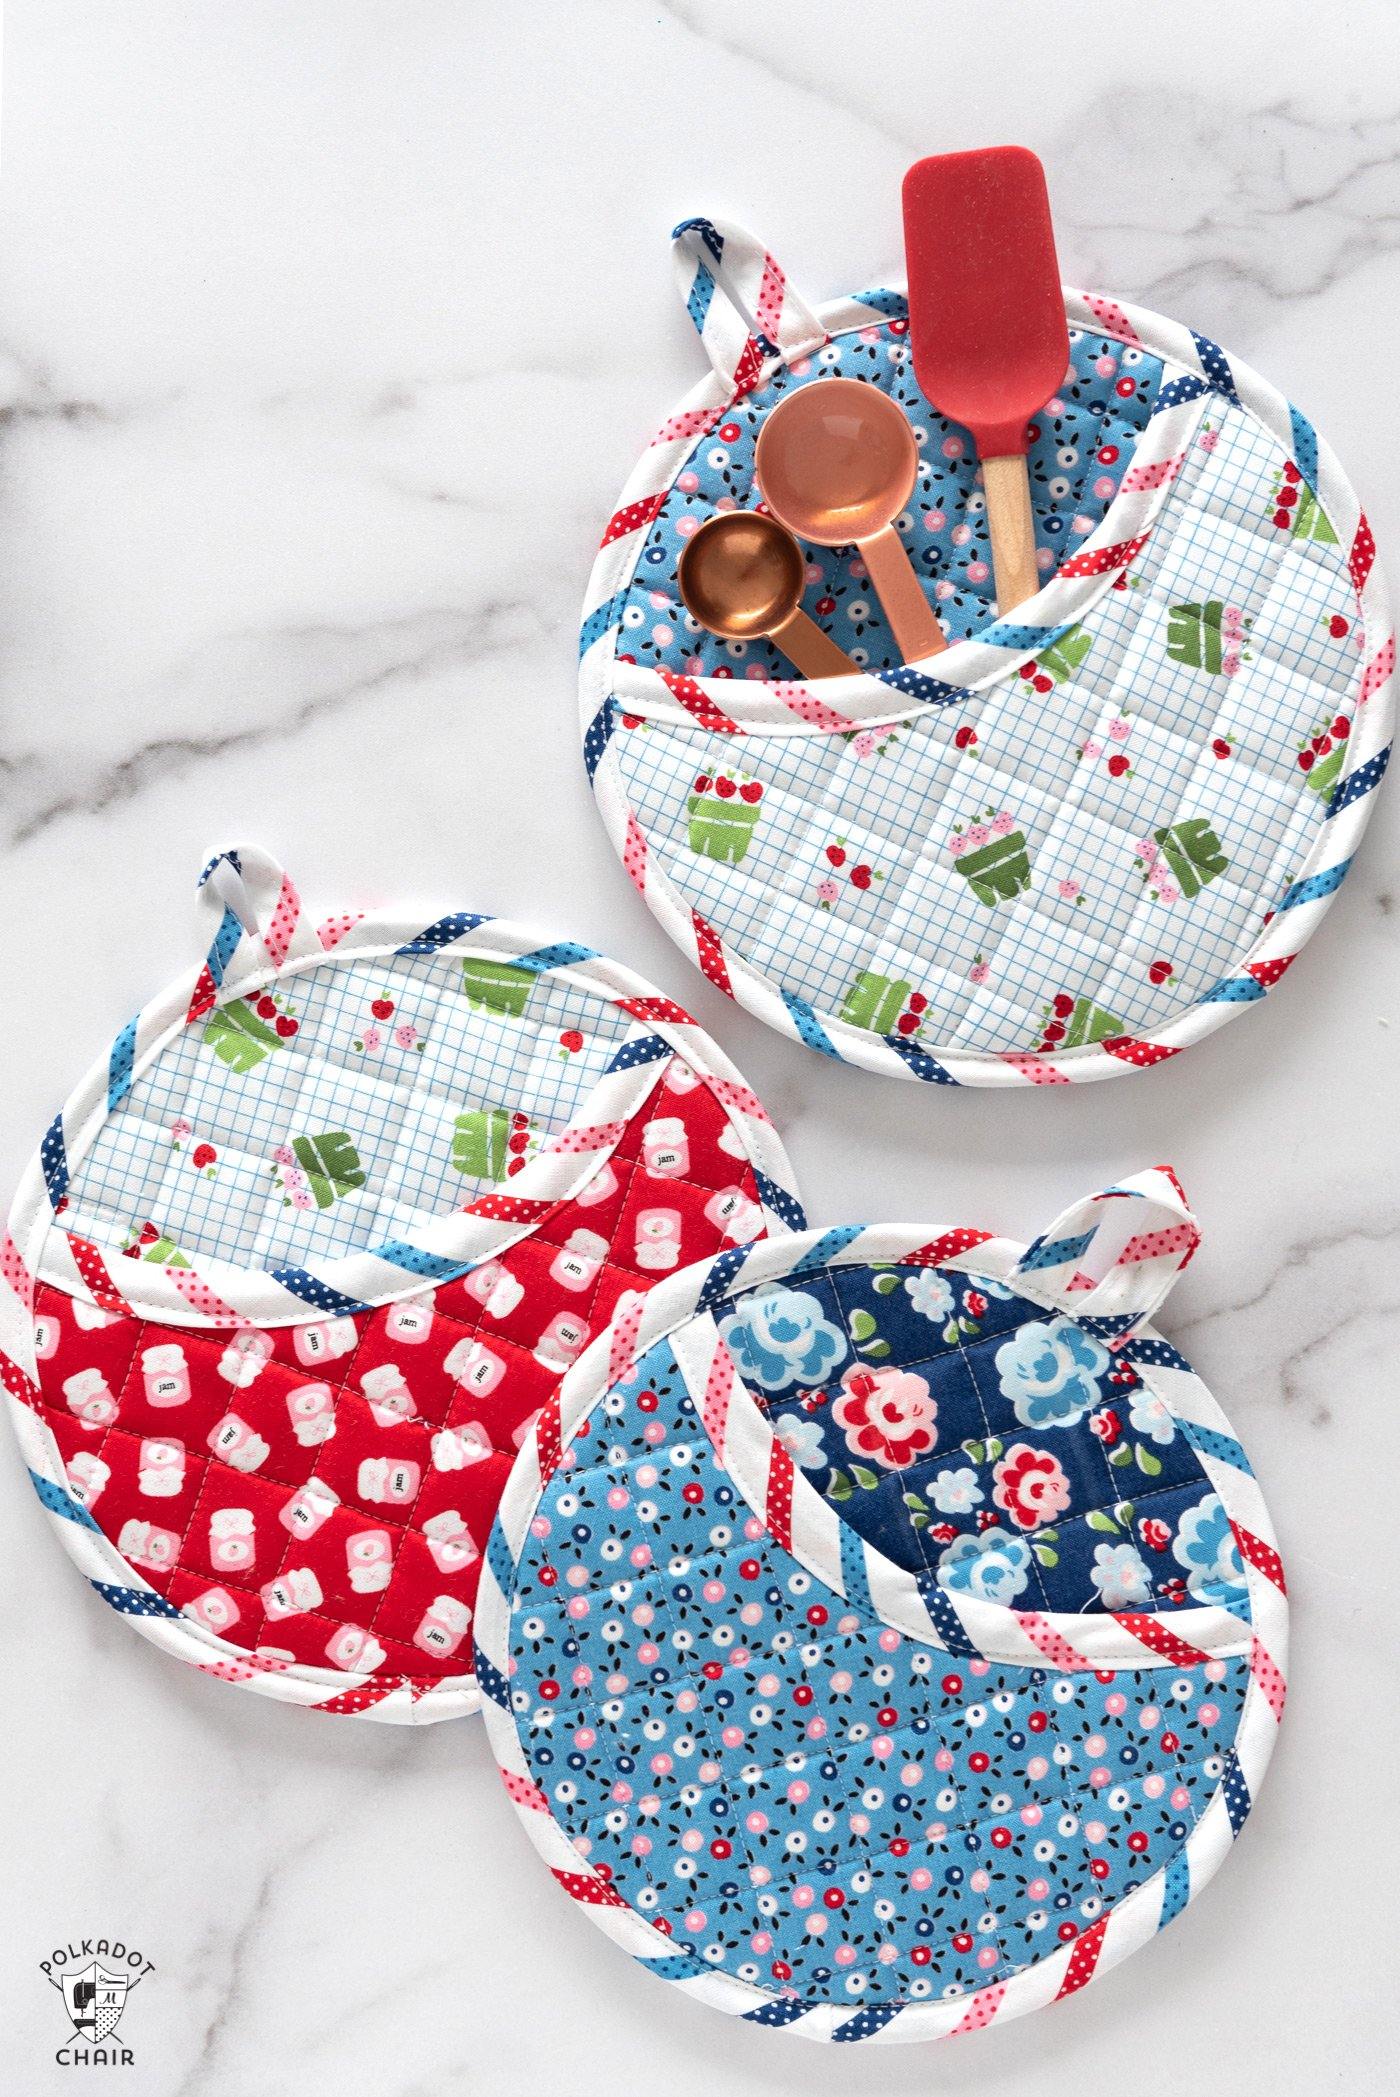 The Quilted Kitchen Potholder Sewing Pattern